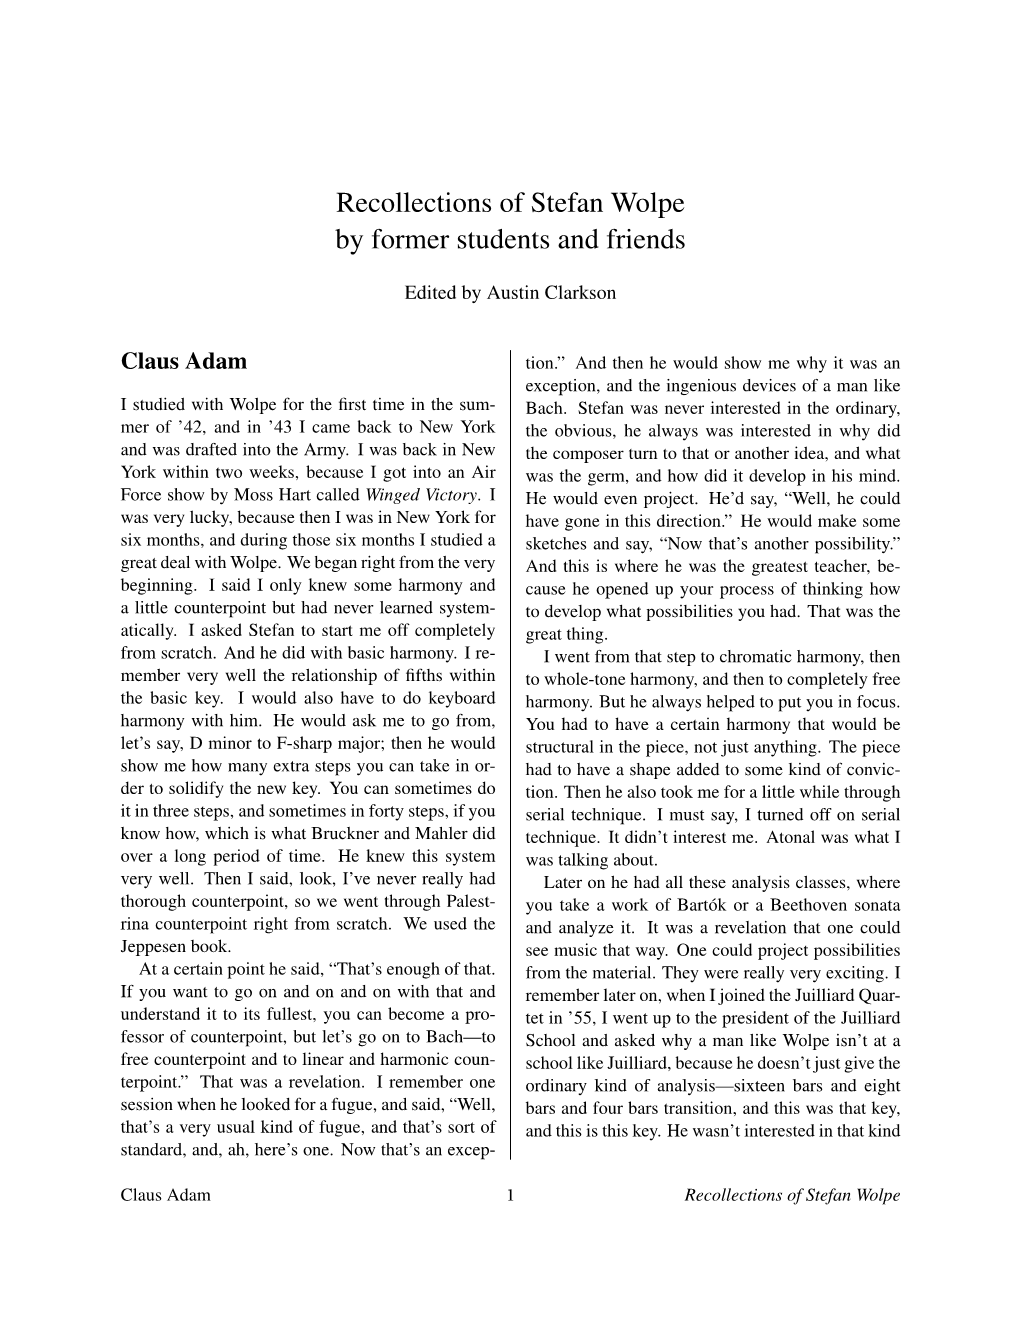 Recollections of Stefan Wolpe by Former Students and Friends